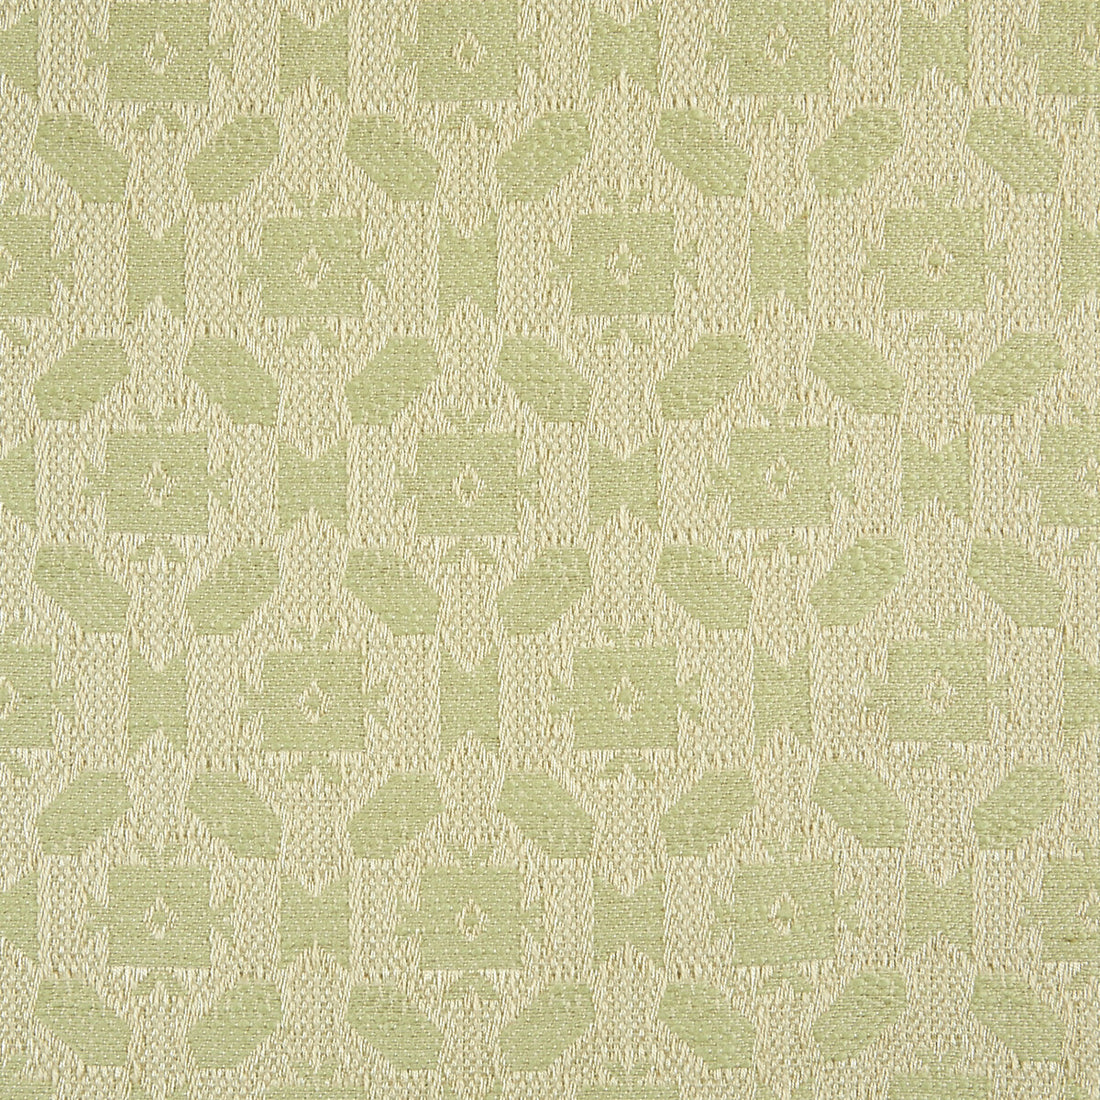 Lowell fabric in celadon color - pattern BFC-3635.23.0 - by Lee Jofa in the Blithfield collection